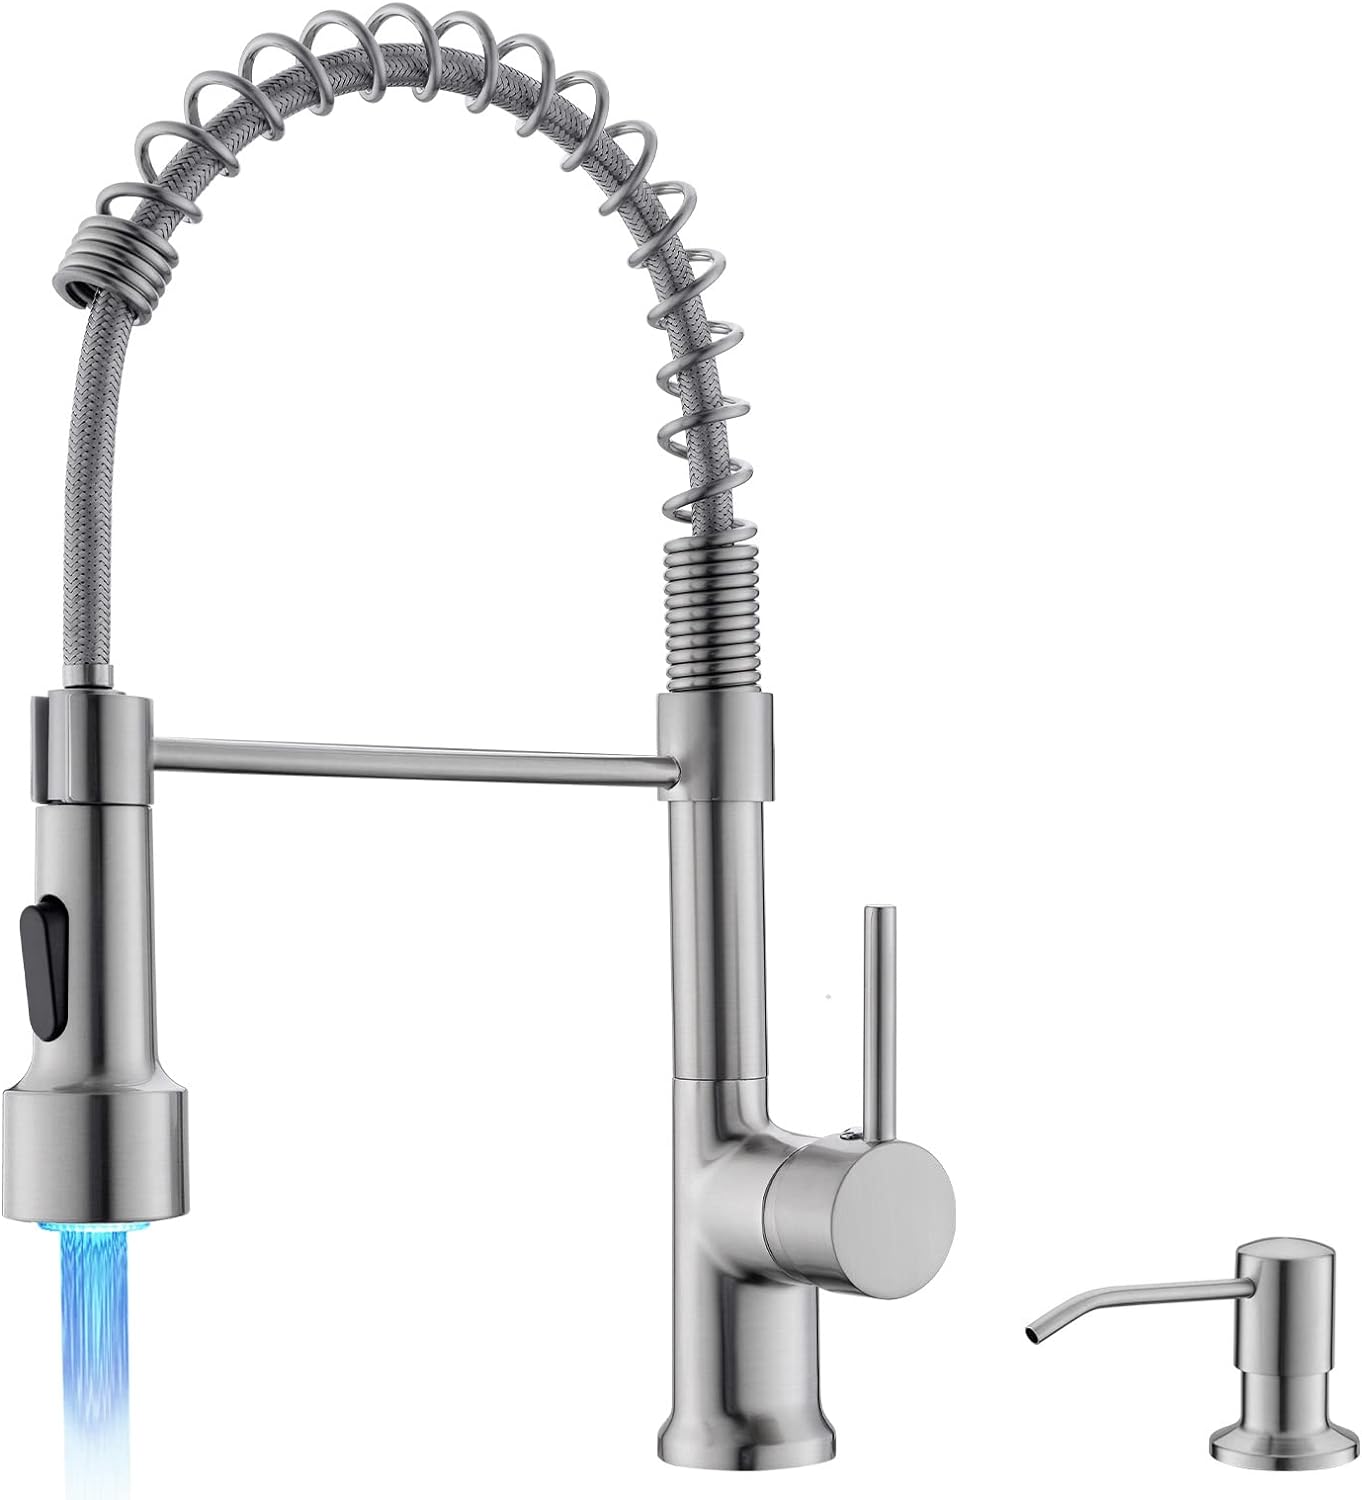 GIMILI LED Kitchen Faucet with Soap Dispenser, Modern Single Handle Spring Kitchen Sink Faucets with Pull Down Sprayer